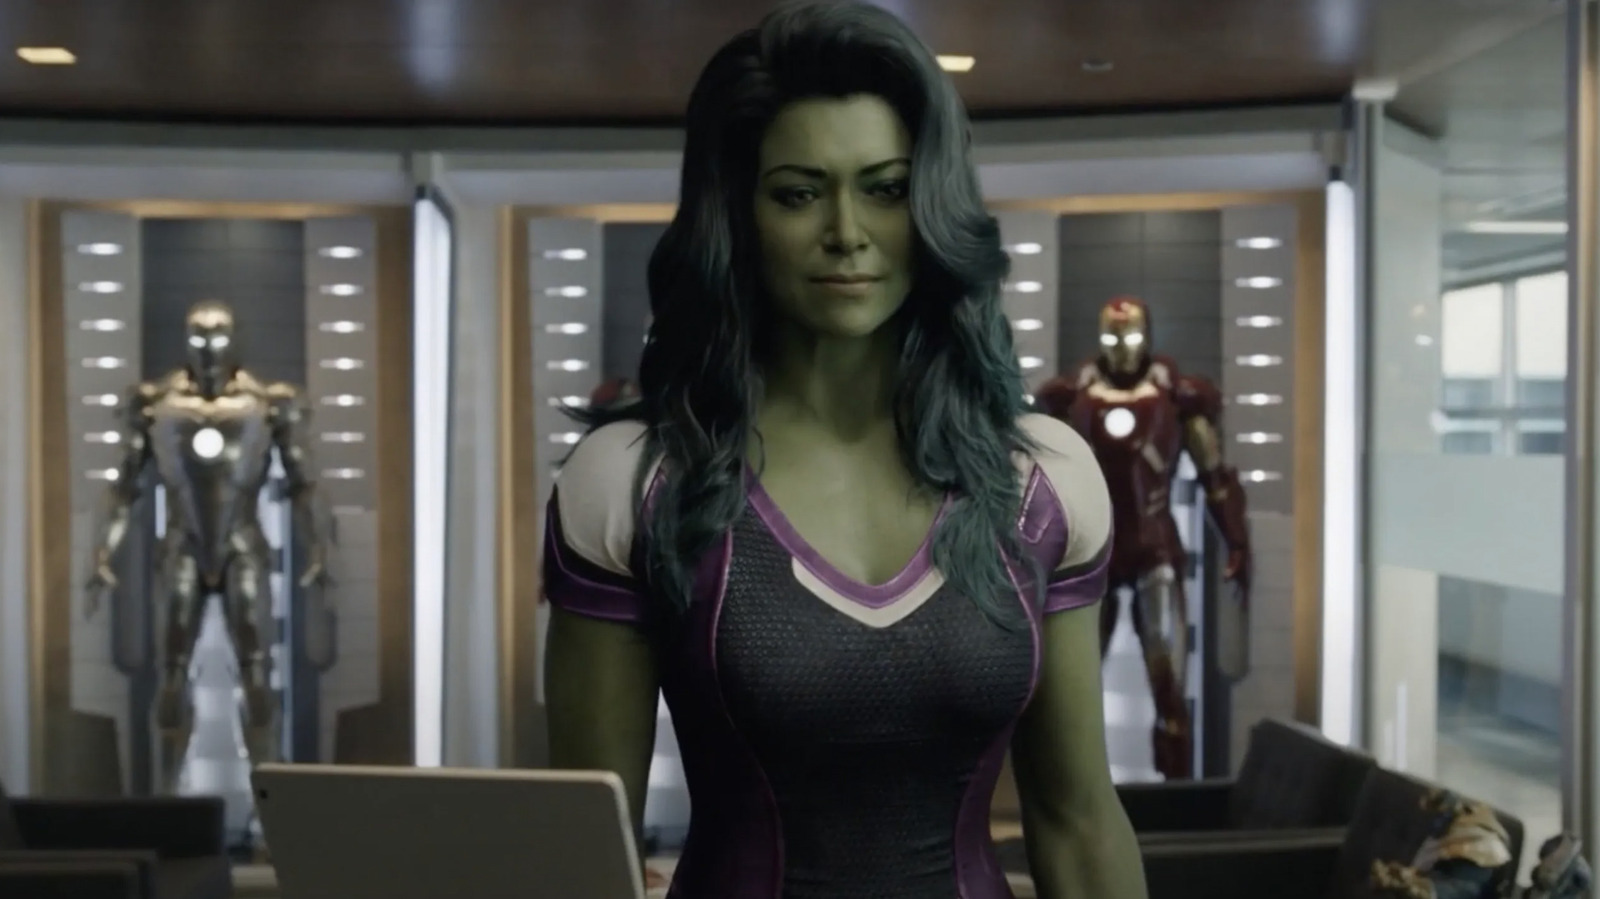 She Hulk Director Kat Coiro Immediately Knew She Wanted To Get Meta In The Mcu Exclusive 5532